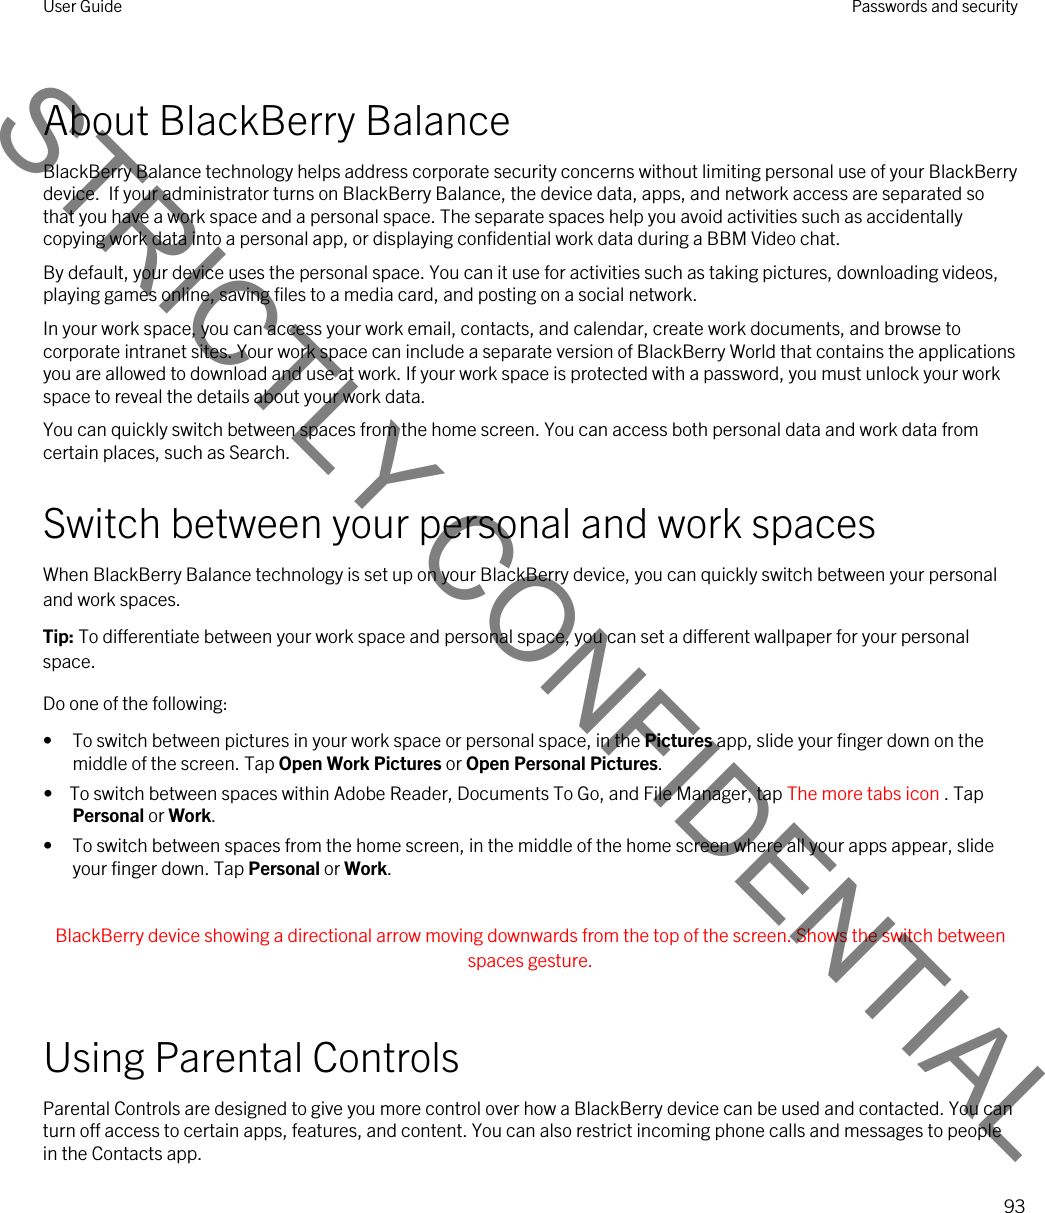 About BlackBerry BalanceBlackBerry Balance technology helps address corporate security concerns without limiting personal use of your BlackBerry device.  If your administrator turns on BlackBerry Balance, the device data, apps, and network access are separated so that you have a work space and a personal space. The separate spaces help you avoid activities such as accidentally copying work data into a personal app, or displaying confidential work data during a BBM Video chat.By default, your device uses the personal space. You can it use for activities such as taking pictures, downloading videos, playing games online, saving files to a media card, and posting on a social network. In your work space, you can access your work email, contacts, and calendar, create work documents, and browse to corporate intranet sites. Your work space can include a separate version of BlackBerry World that contains the applications you are allowed to download and use at work. If your work space is protected with a password, you must unlock your work space to reveal the details about your work data.You can quickly switch between spaces from the home screen. You can access both personal data and work data from certain places, such as Search. Switch between your personal and work spacesWhen BlackBerry Balance technology is set up on your BlackBerry device, you can quickly switch between your personal and work spaces.Tip: To differentiate between your work space and personal space, you can set a different wallpaper for your personal space.Do one of the following:• To switch between pictures in your work space or personal space, in the Pictures app, slide your finger down on the middle of the screen. Tap Open Work Pictures or Open Personal Pictures.•  To switch between spaces within Adobe Reader, Documents To Go, and File Manager, tap The more tabs icon . Tap Personal or Work.• To switch between spaces from the home screen, in the middle of the home screen where all your apps appear, slide your finger down. Tap Personal or Work. BlackBerry device showing a directional arrow moving downwards from the top of the screen. Shows the switch between spaces gesture. Using Parental ControlsParental Controls are designed to give you more control over how a BlackBerry device can be used and contacted. You can turn off access to certain apps, features, and content. You can also restrict incoming phone calls and messages to people in the Contacts app.User Guide Passwords and security93STRICTLY CONFIDENTIAL